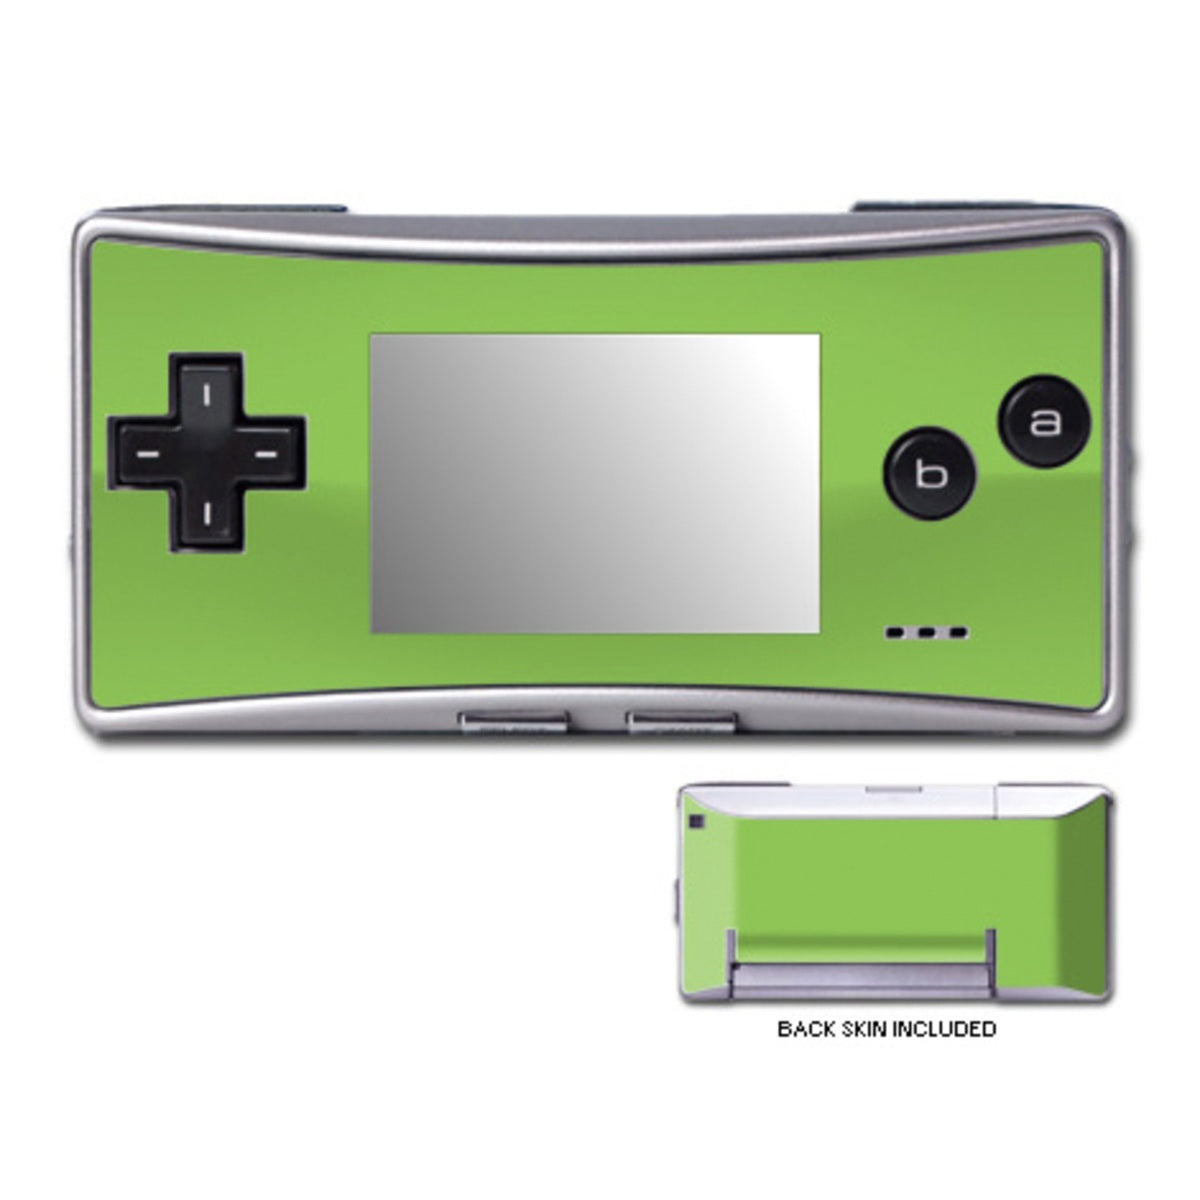 Solid State Lime - Nintendo GameBoy Micro Skin